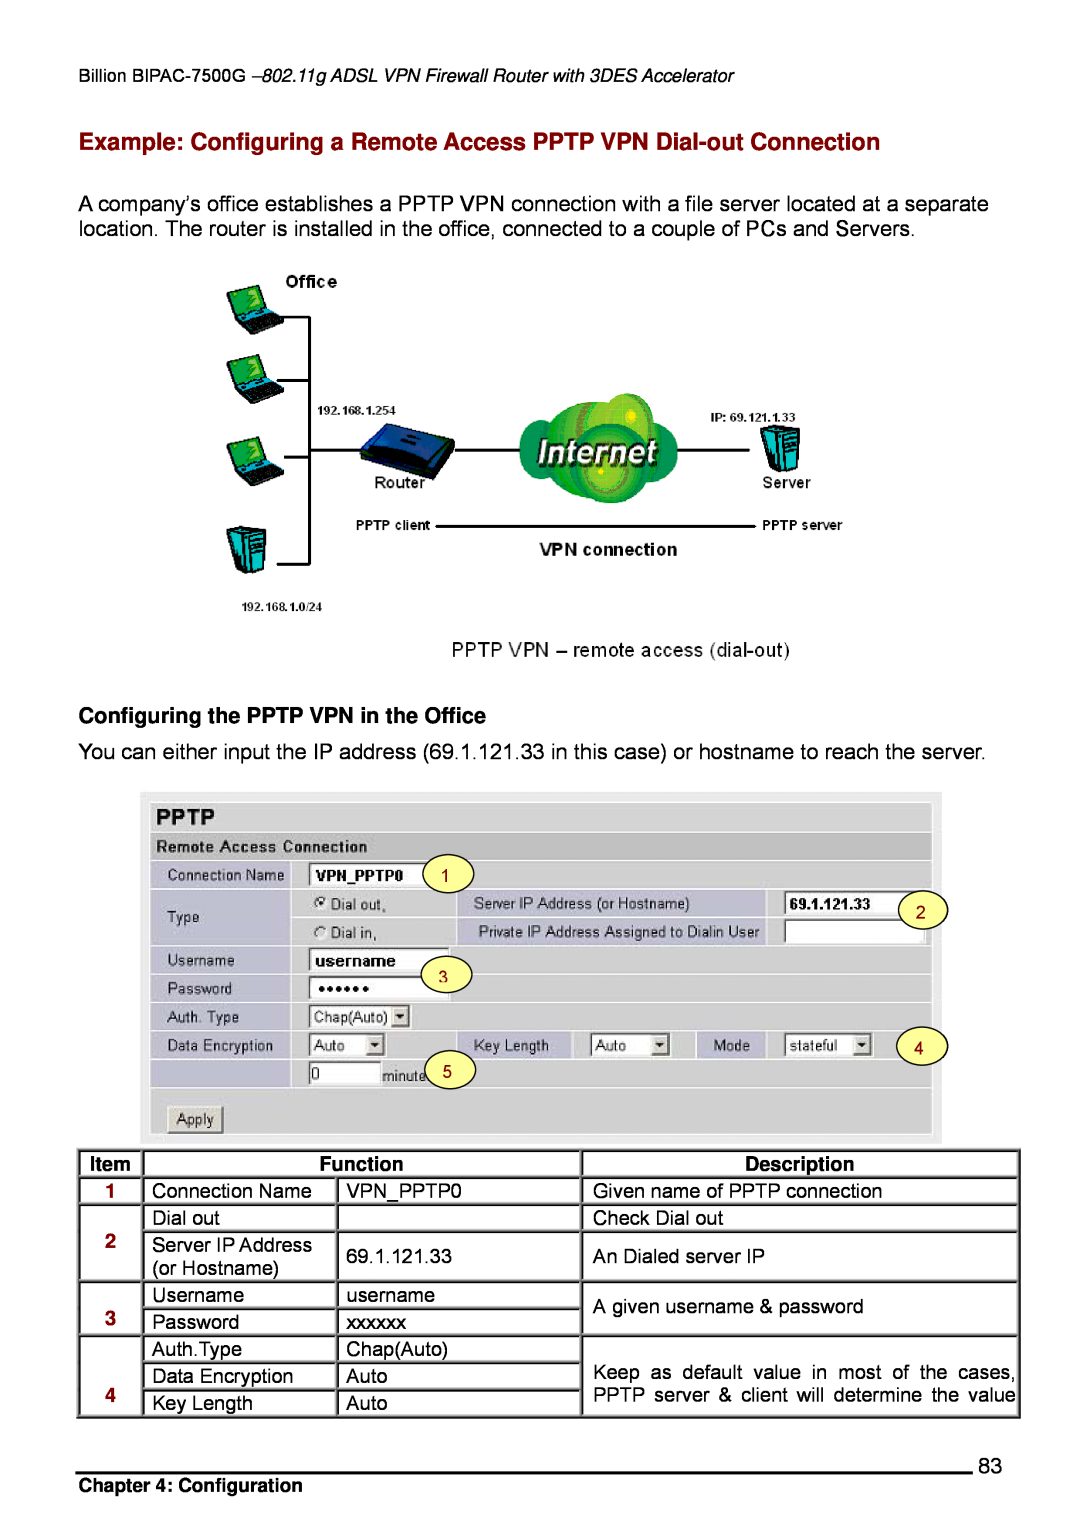 Billion Electric Company BIPAC-7500G user manual Example Configuring a Remote Access PPTP VPN Dial-out Connection 